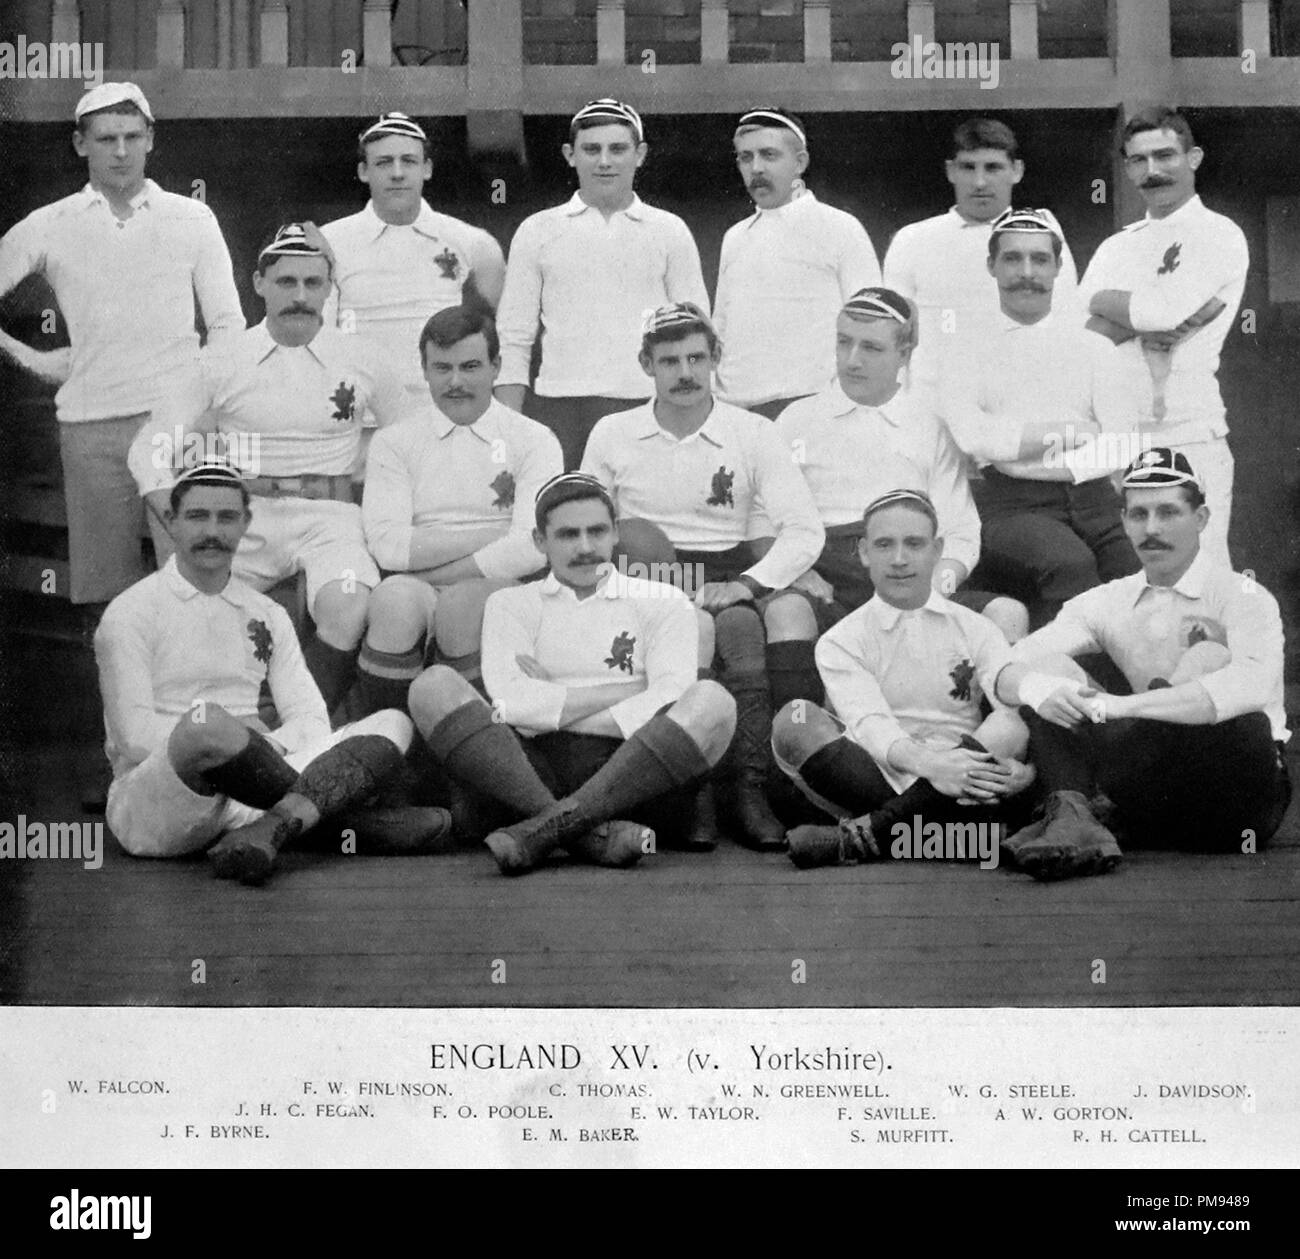 England XV Rugby Team in the 1890s Stock Photo